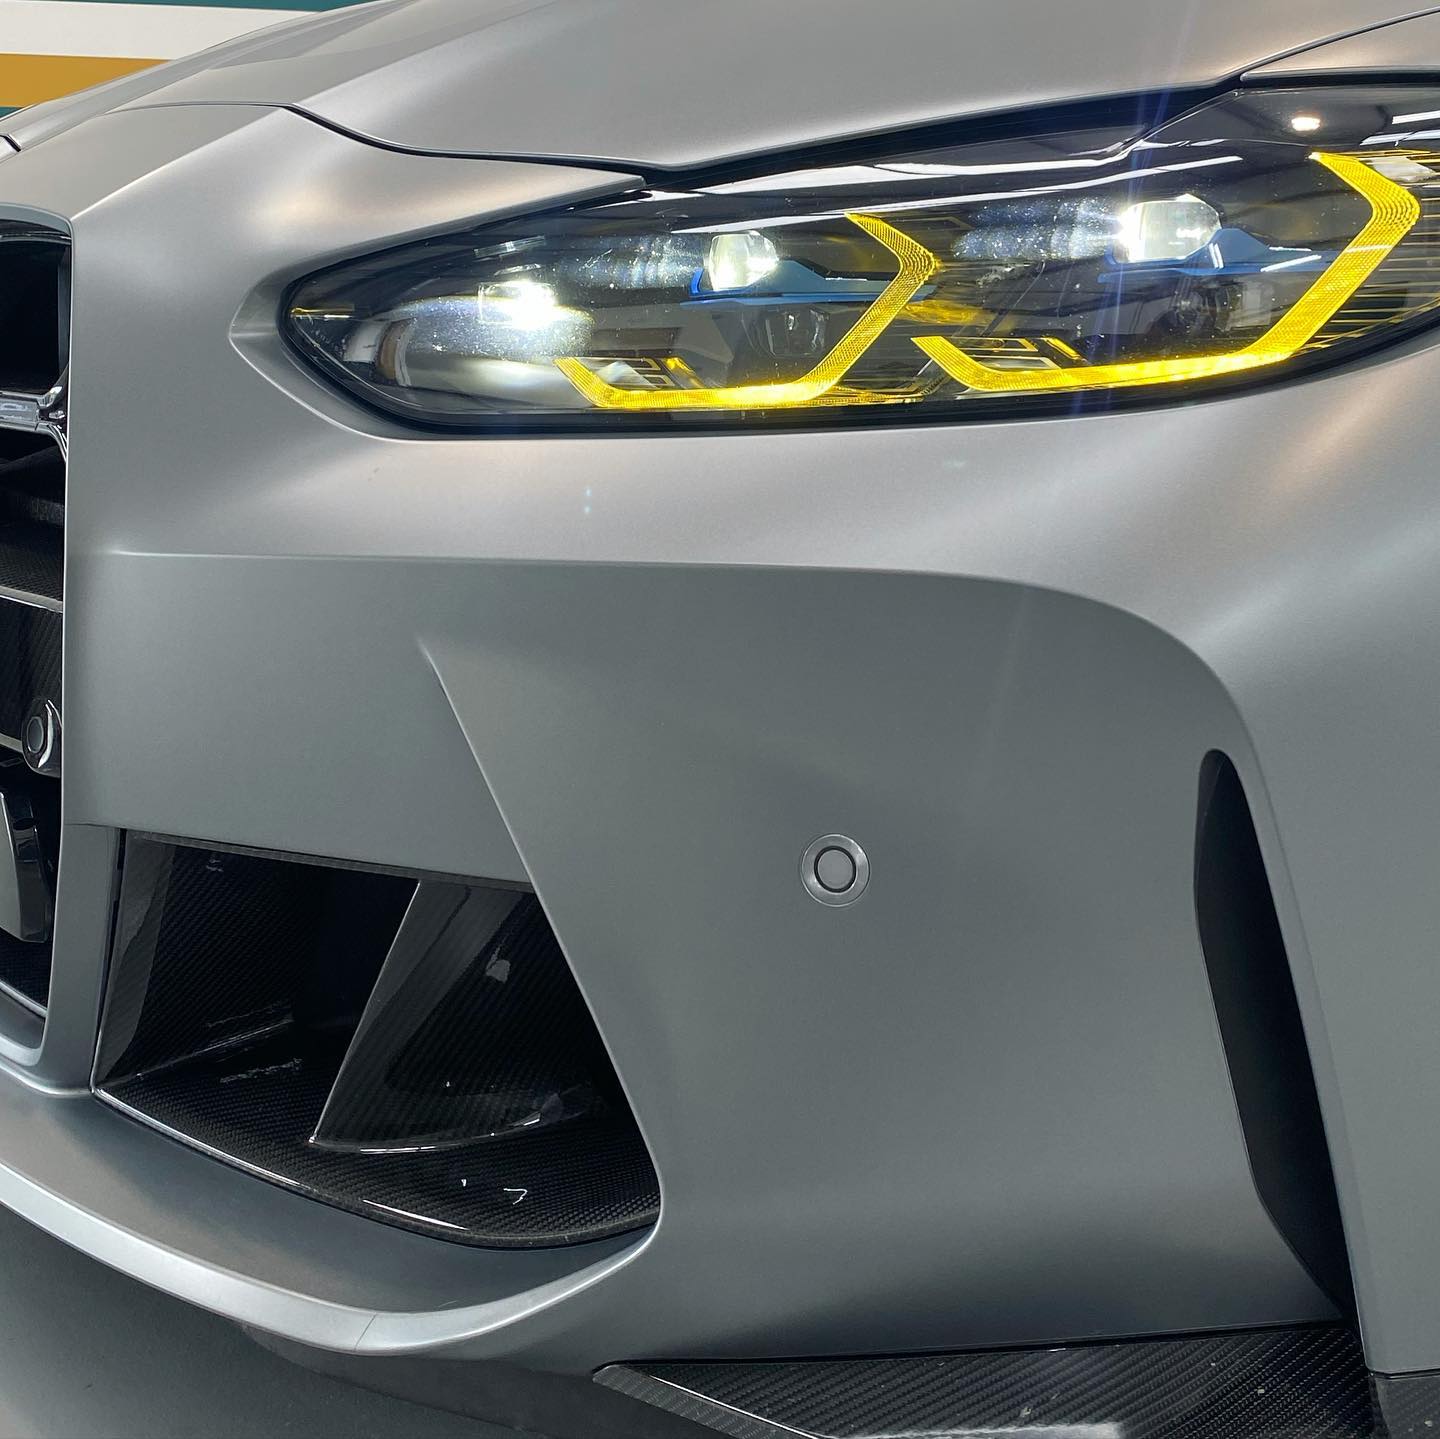 Close-up of a gray sports car's front showcasing its headlight and air intake design.